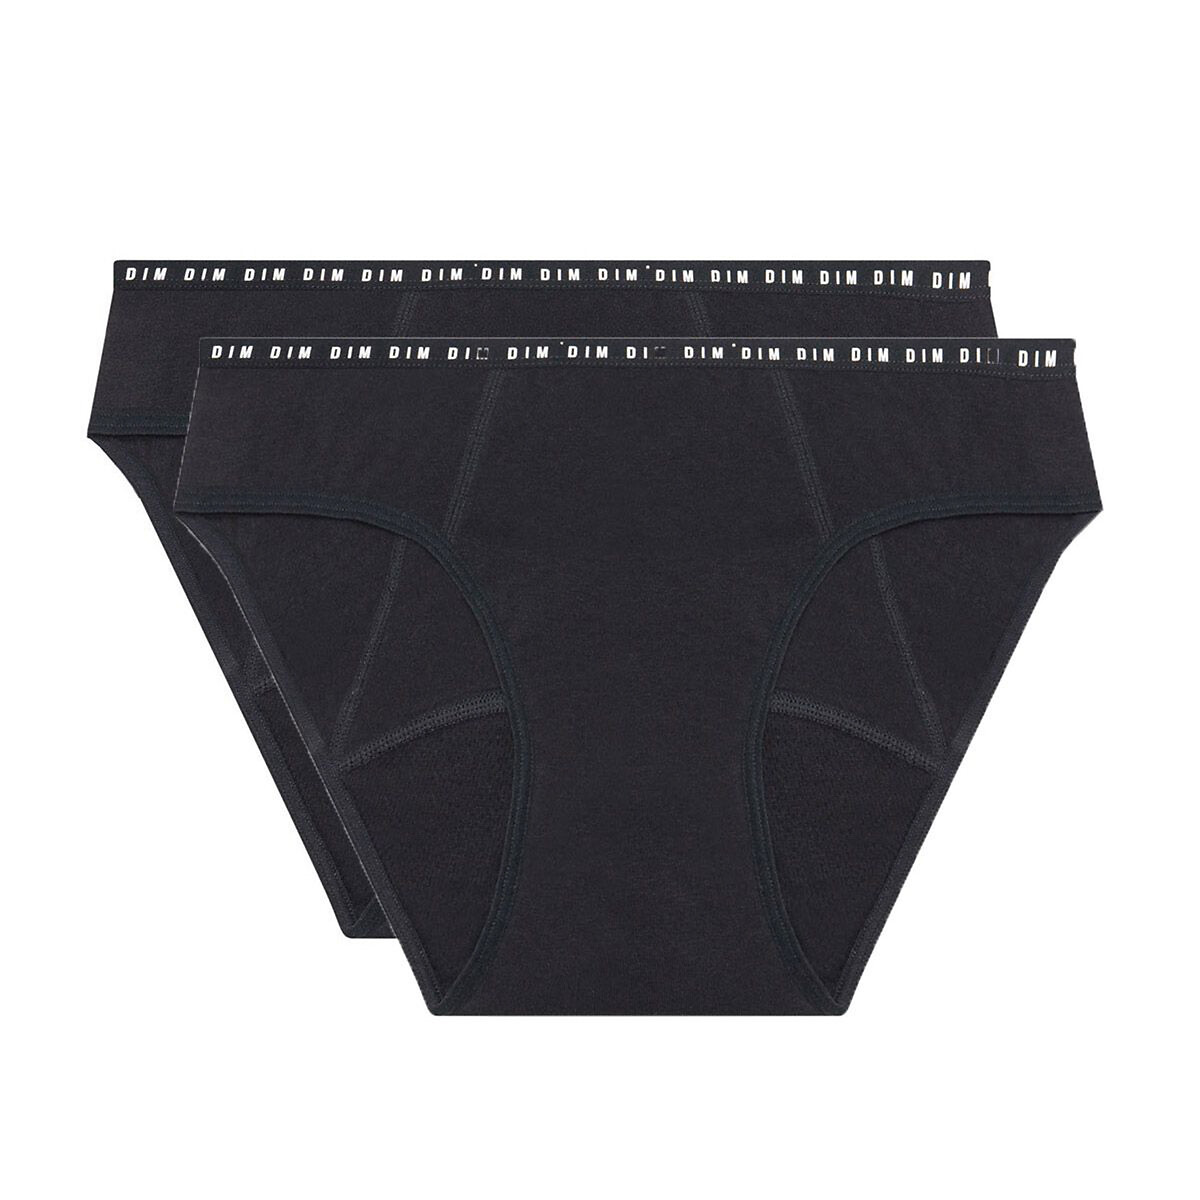 Pack of 2 Protect Period Knickers in Cotton, Heavy Flow